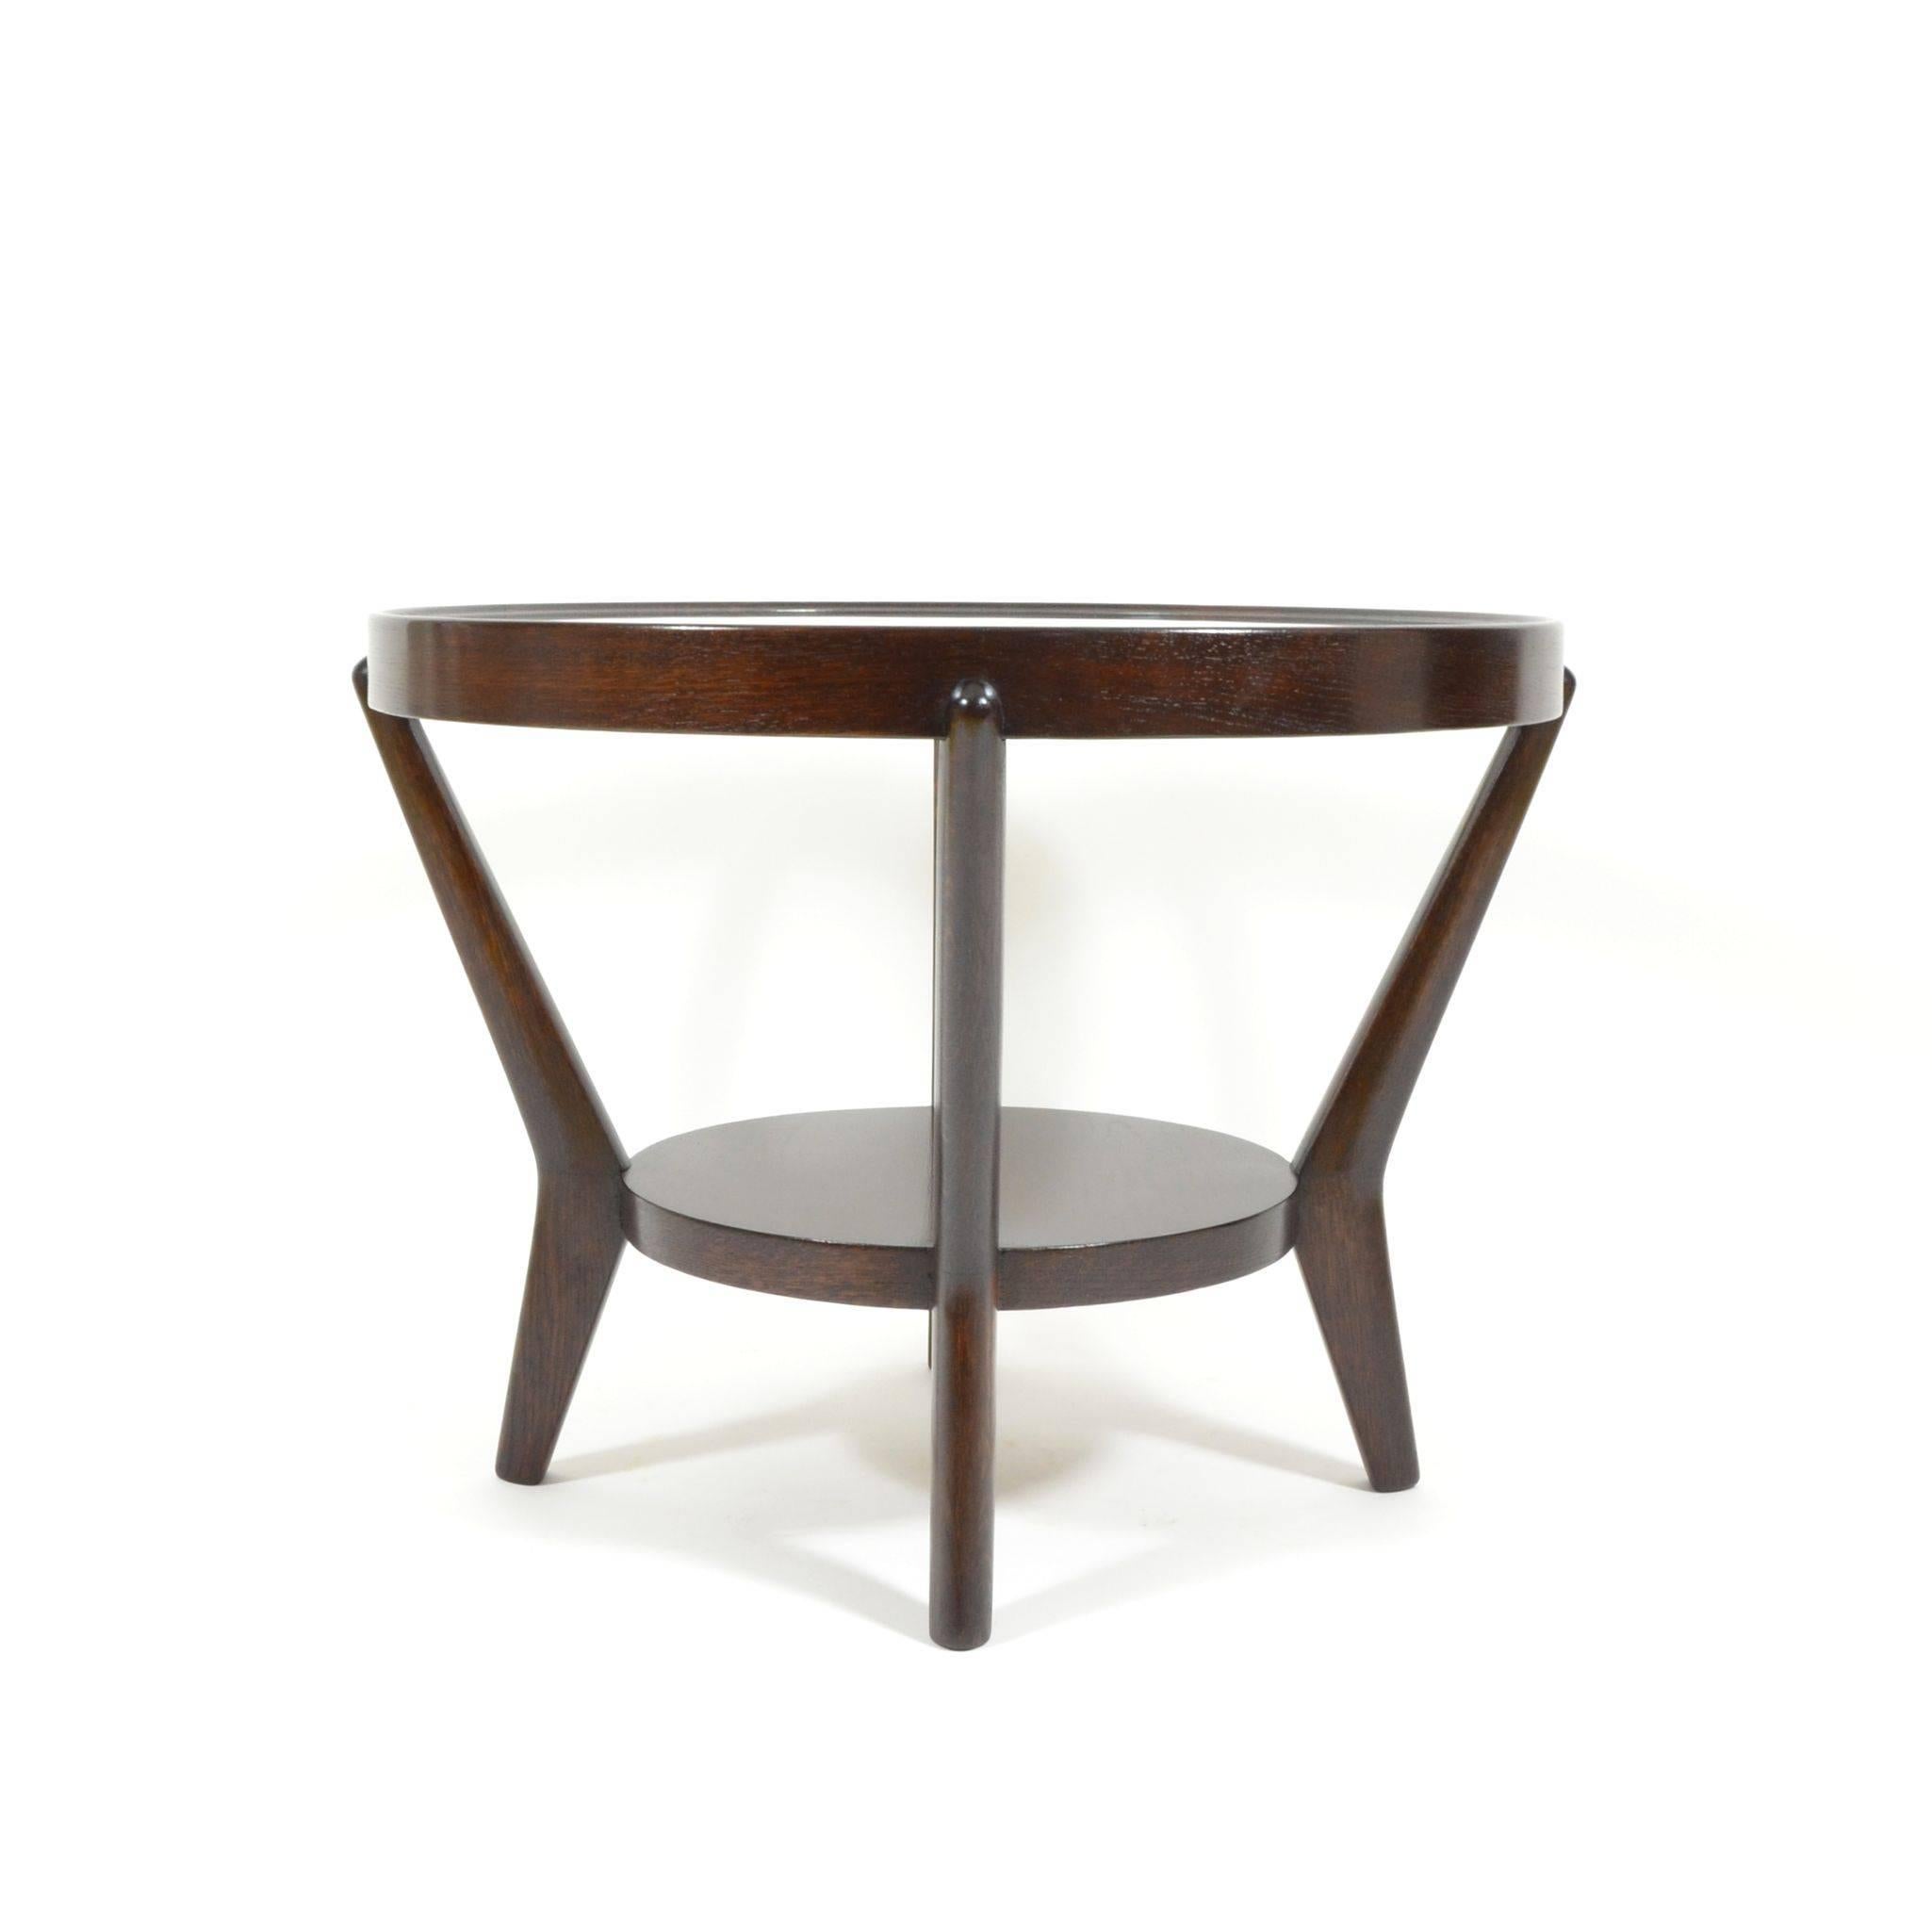 Round coffee table in functionalist style, designed in 1944 by K. Koželka and A. Kropácek for Ceské Umelecké Dílny. Varnished veneer, round glass table top inserted into a wooden frame. This table comes from a seating group that won a silver medal